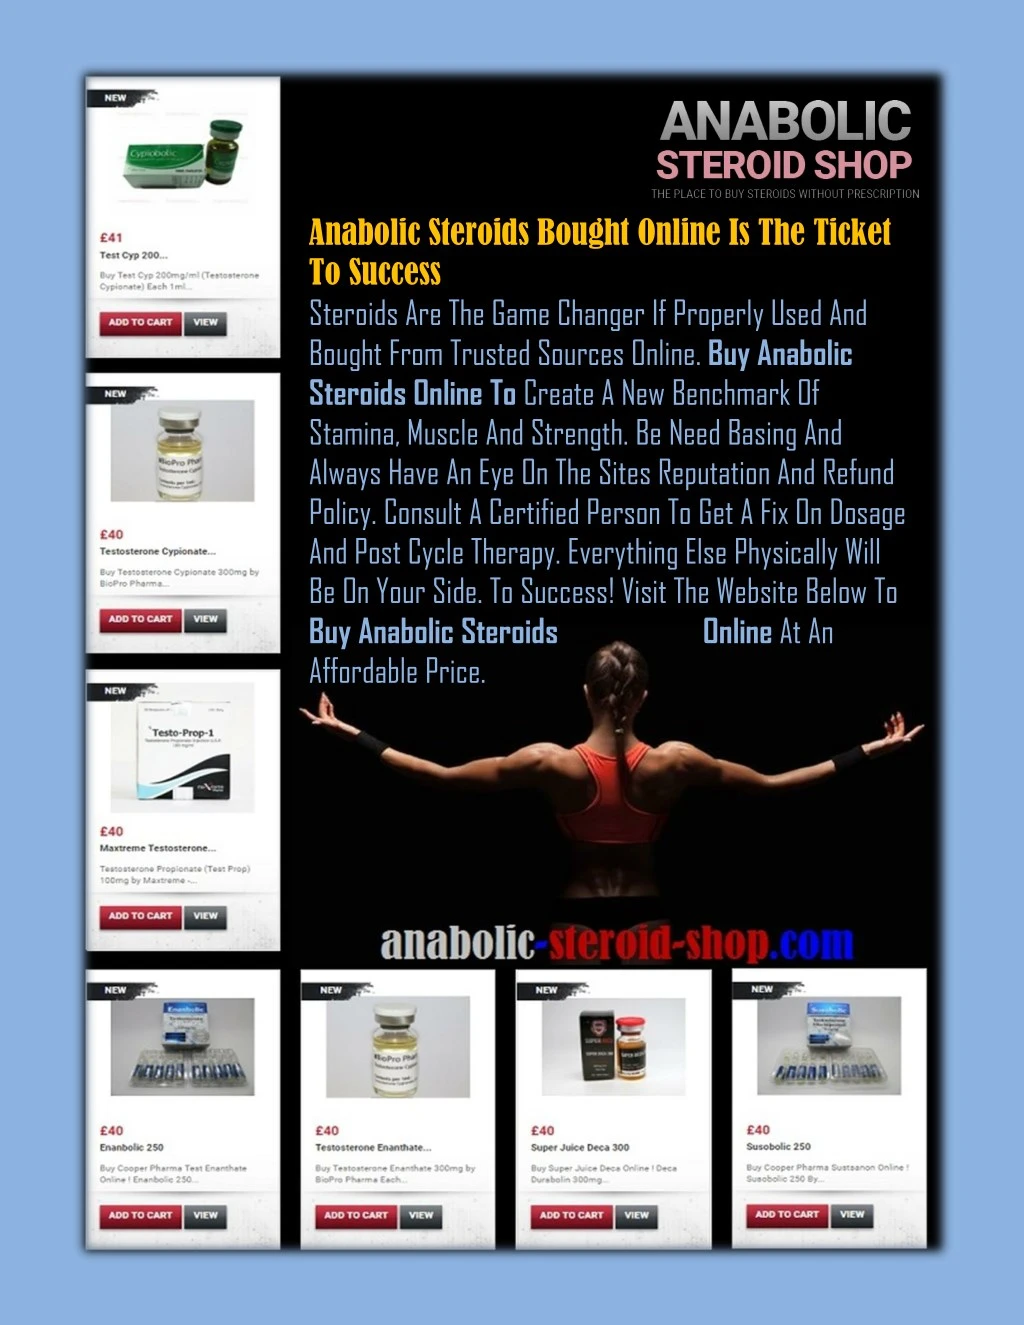 anabolic steroids bought online is the ticket